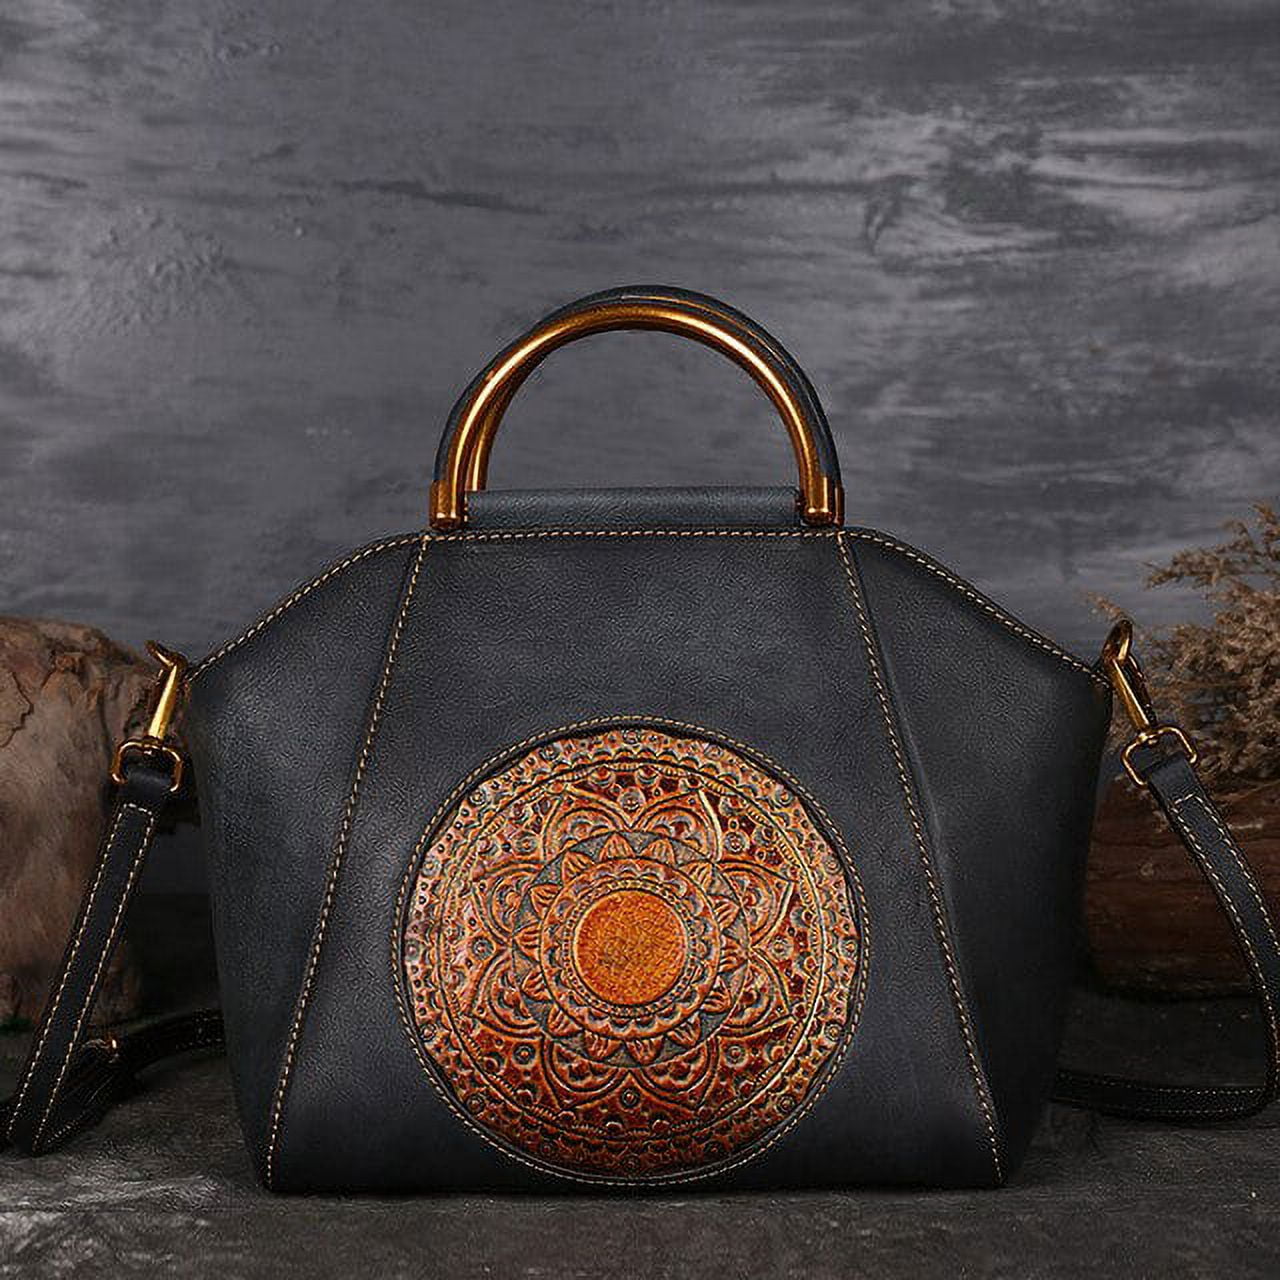 Leather Tote Bag: Autumn Harvest Tote | leather handbags by KMM & Co.